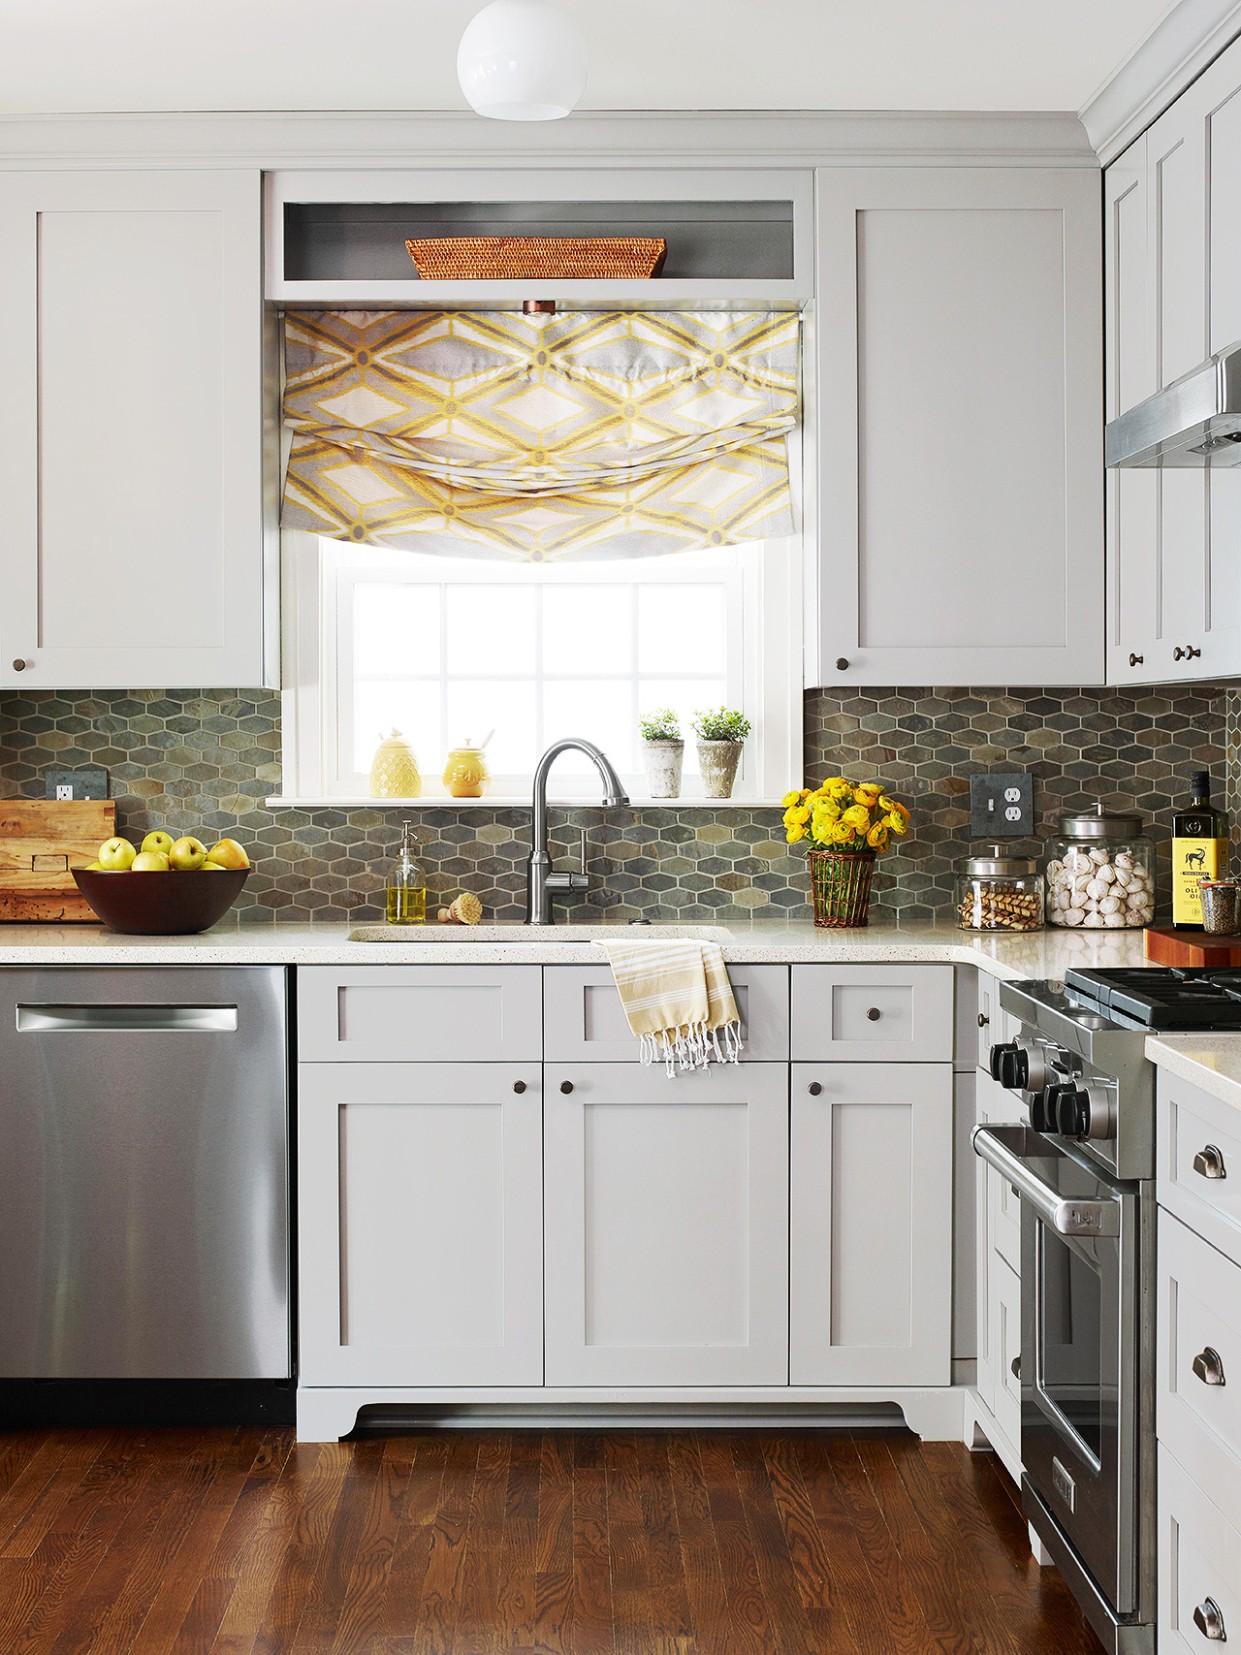 5 Small Kitchen Color Ideas for a Big Boost of Style  Better  - what is the best color for a small kitchen?